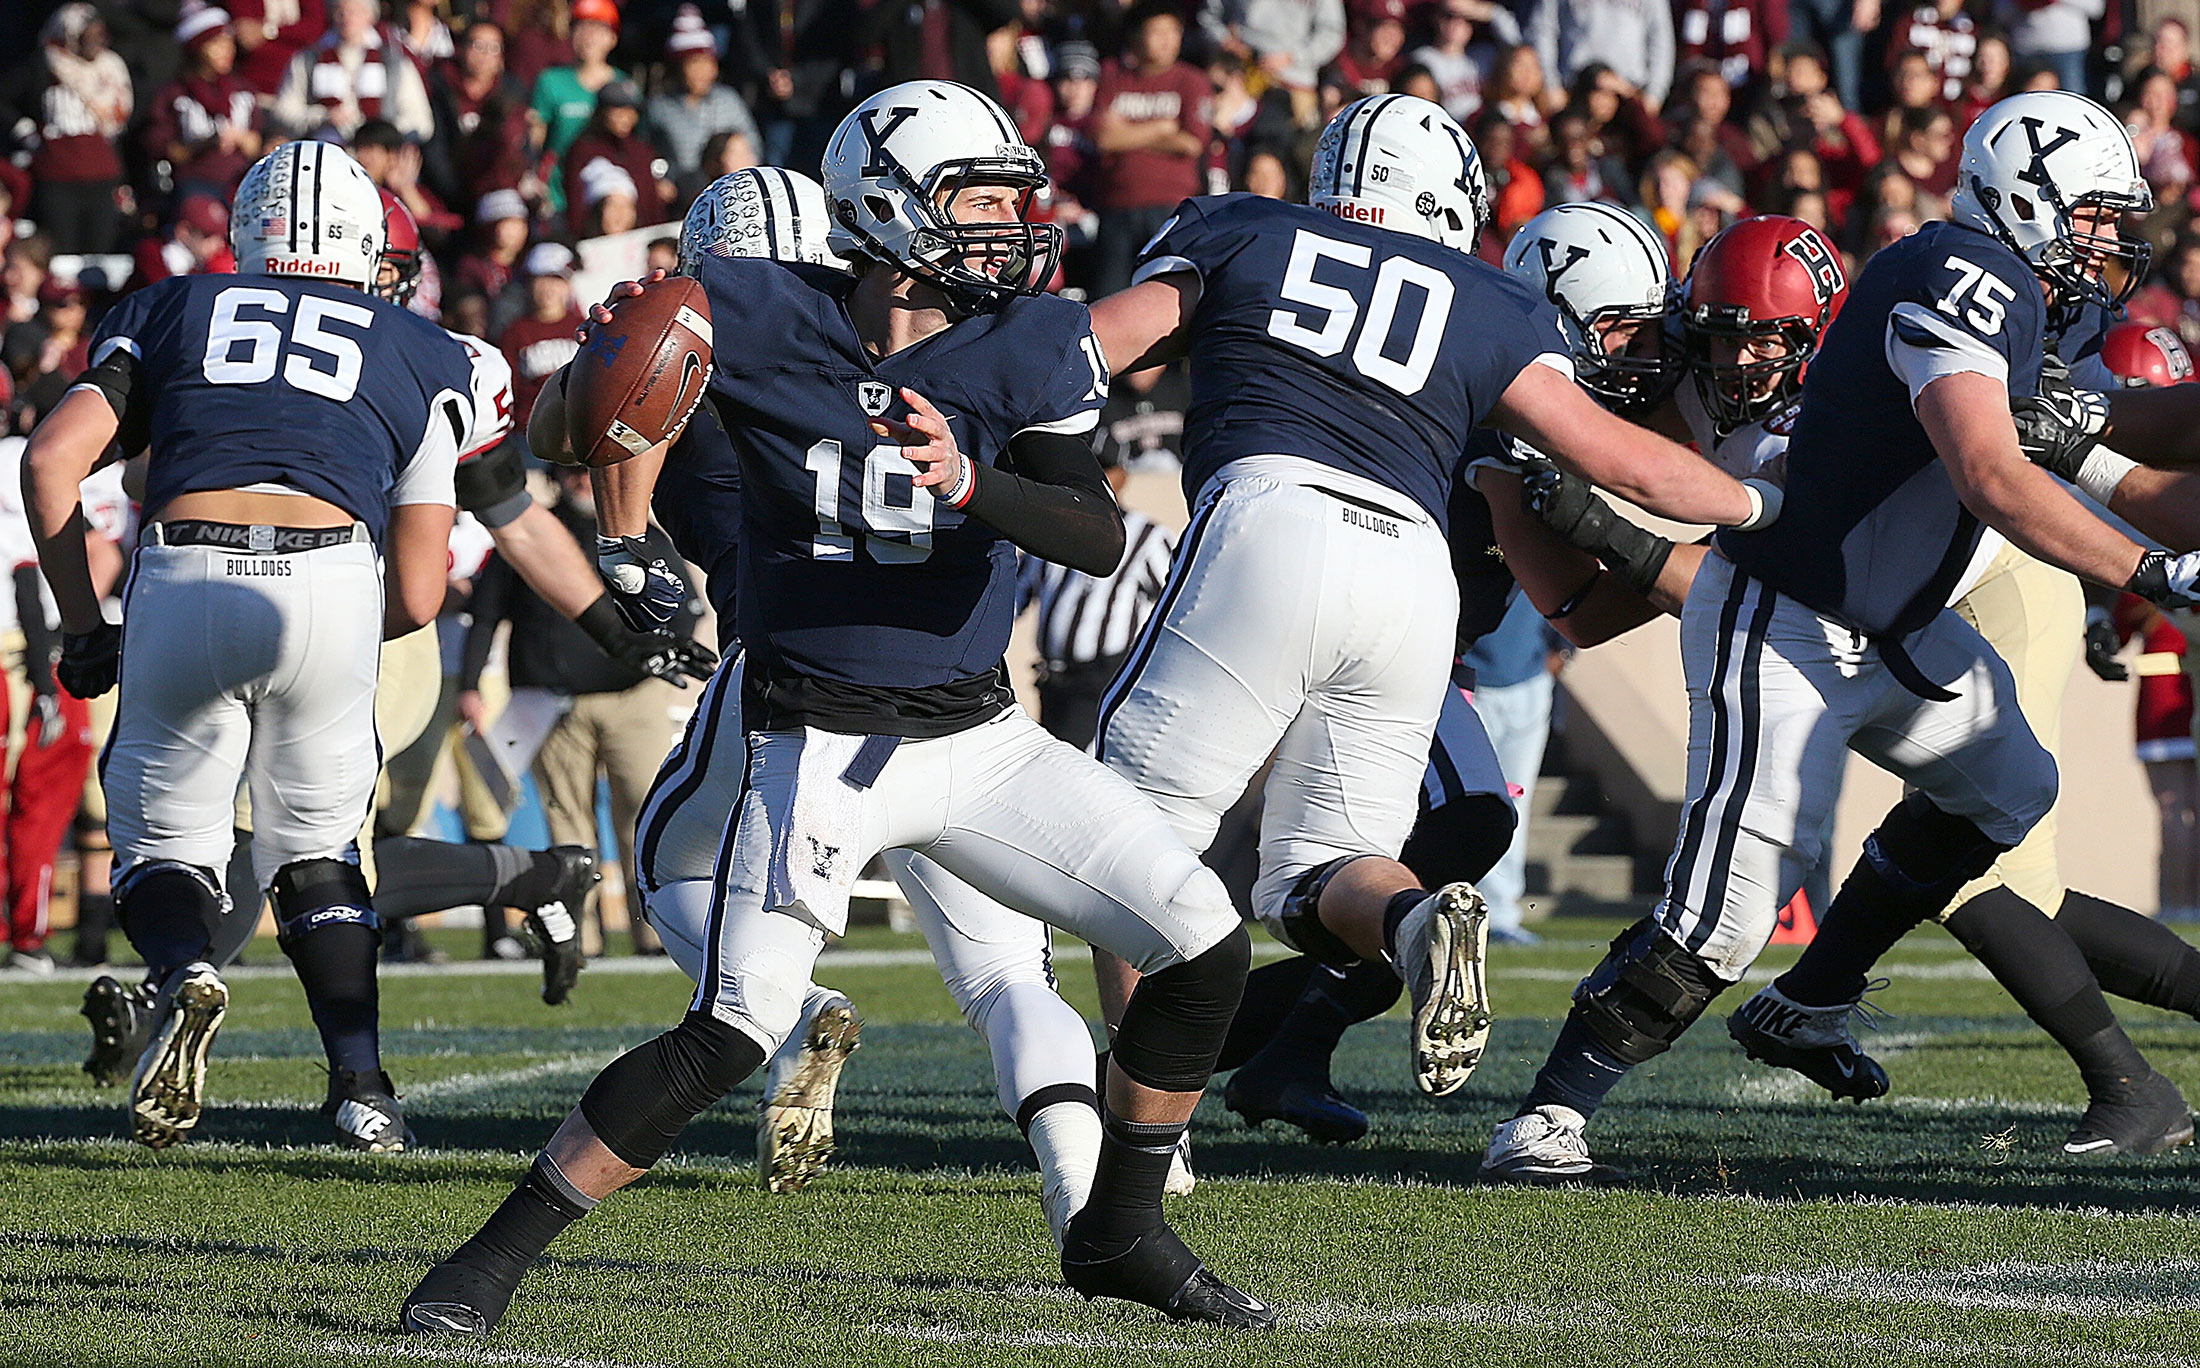 Yale athletes take to field in new Under Armour uniforms - Yale Daily News